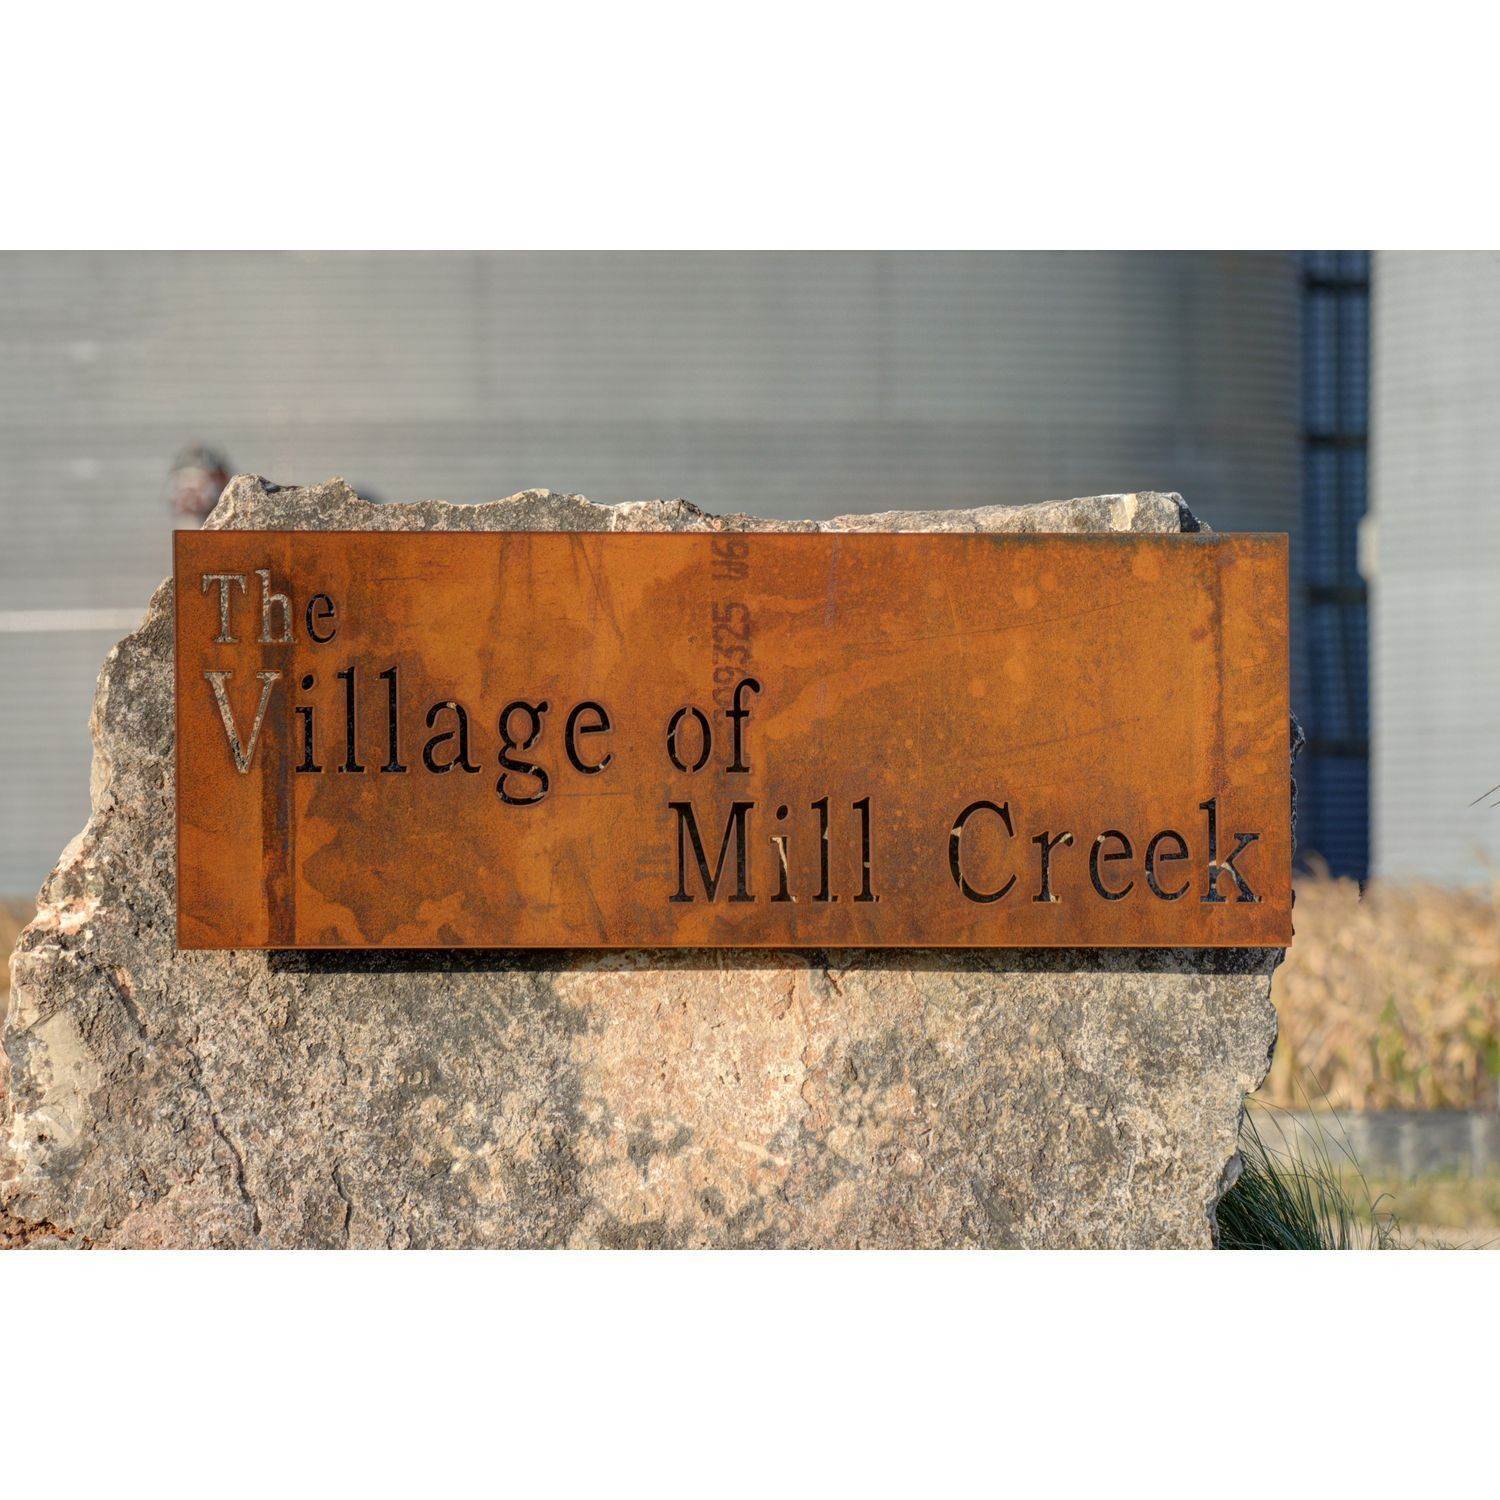 6. The Village of Mill Creek 50' xây dựng tại 2809 Pearl Barley, Seguin, TX 78155